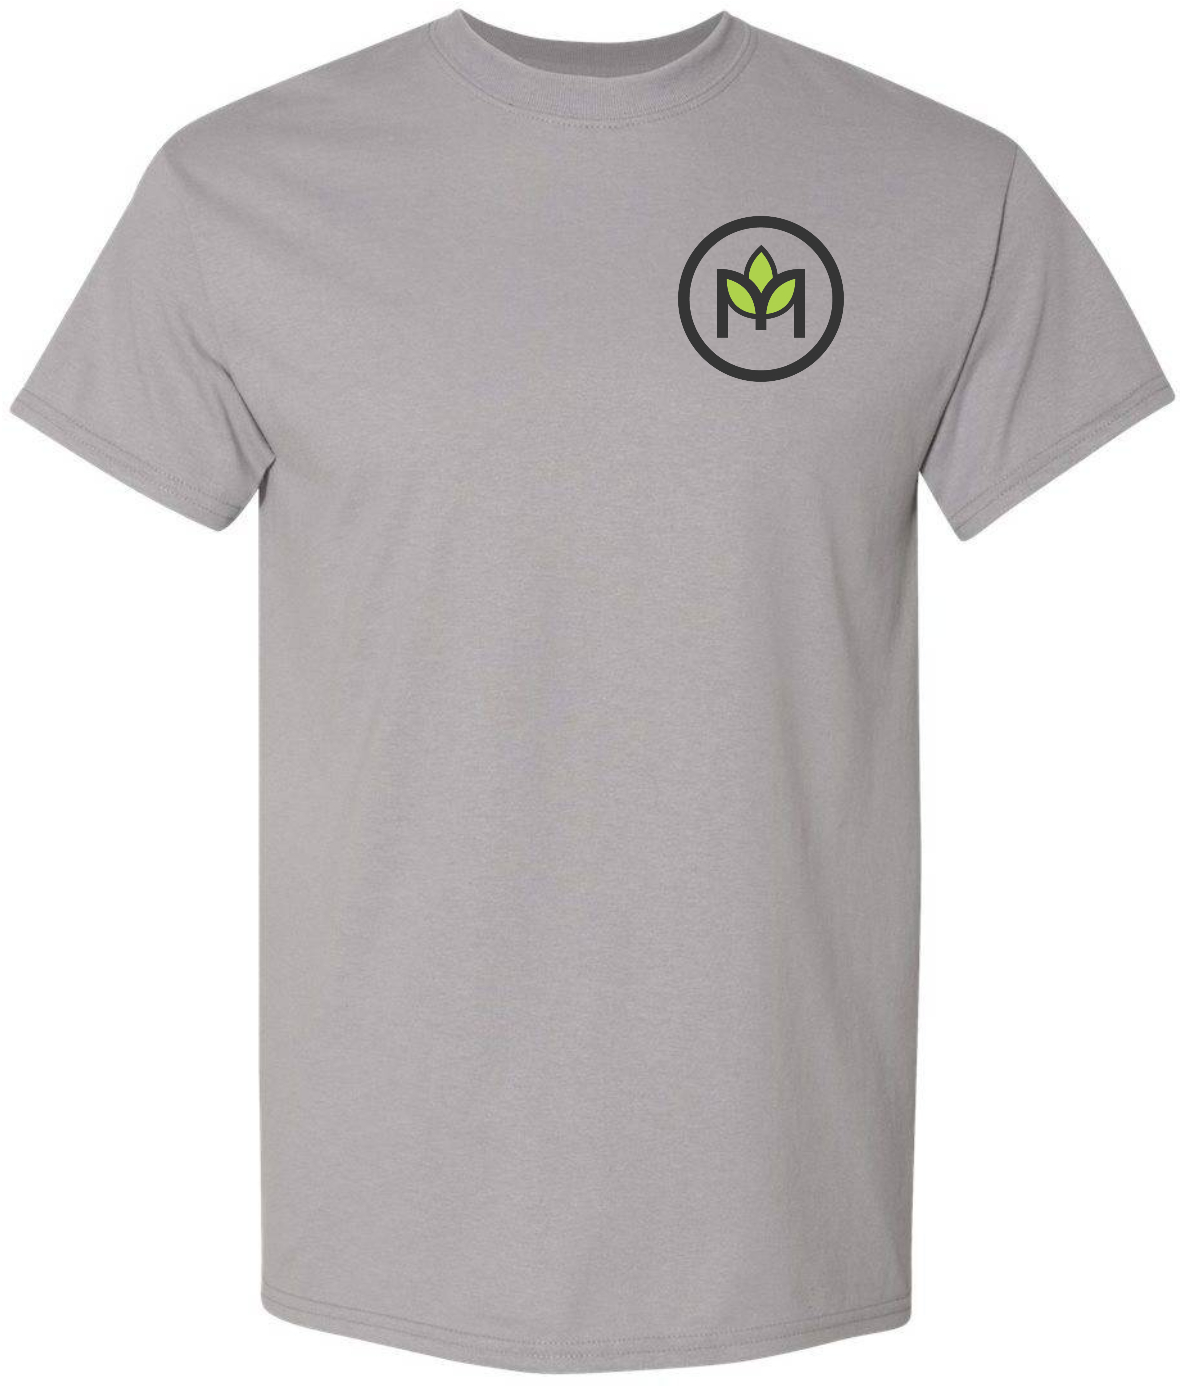 grey short sleeve with primary logo